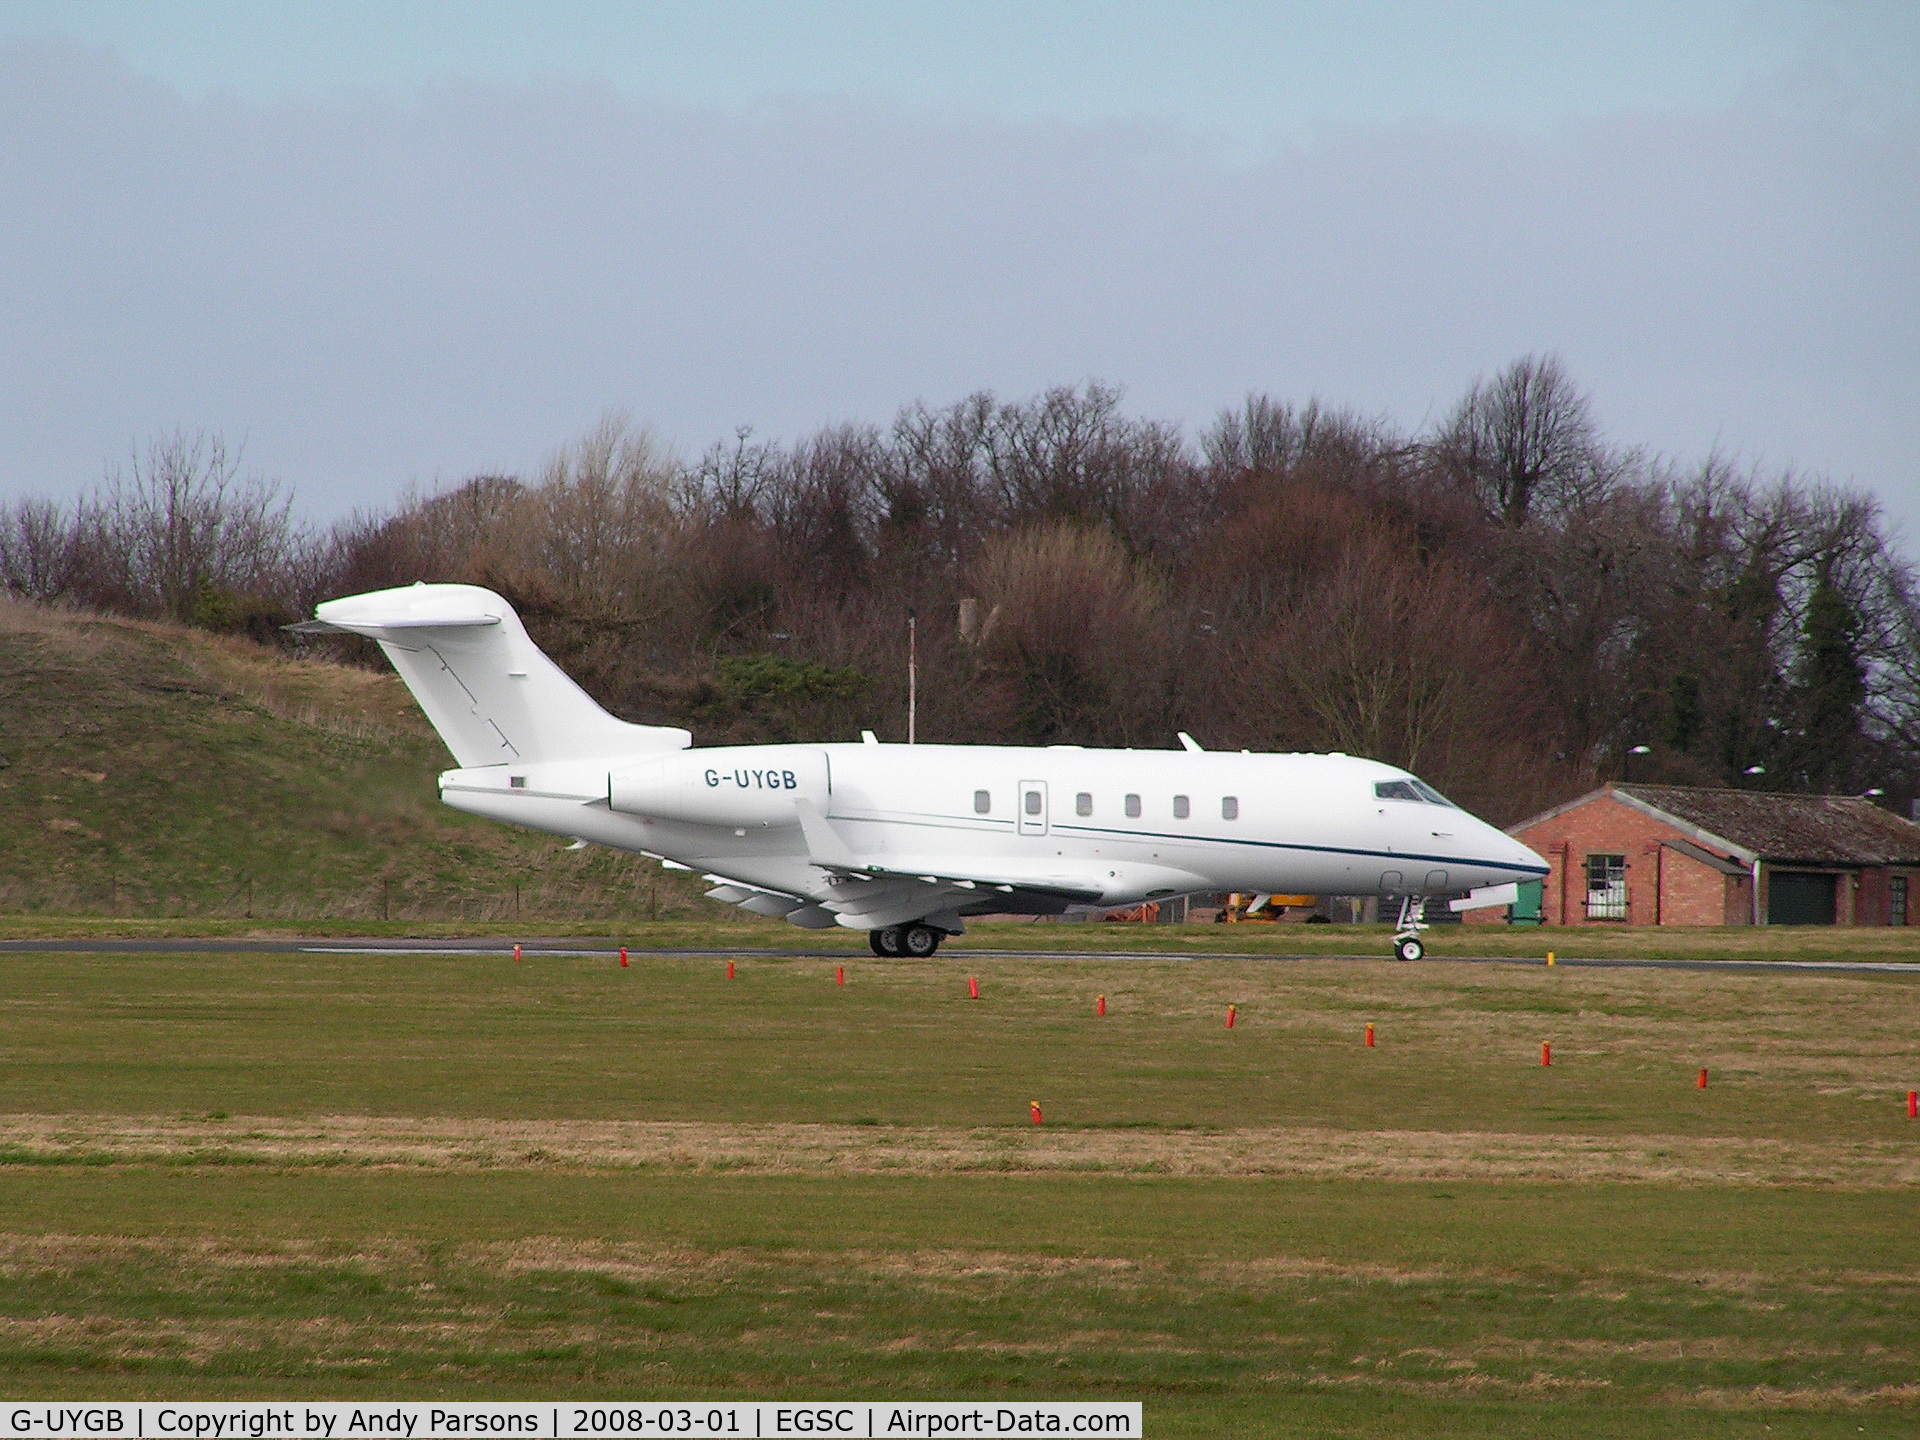 G-UYGB, 2007 Bombardier Challenger 300 (BD-100-1A10) C/N 20169, G-UYGB Training at Cambridge